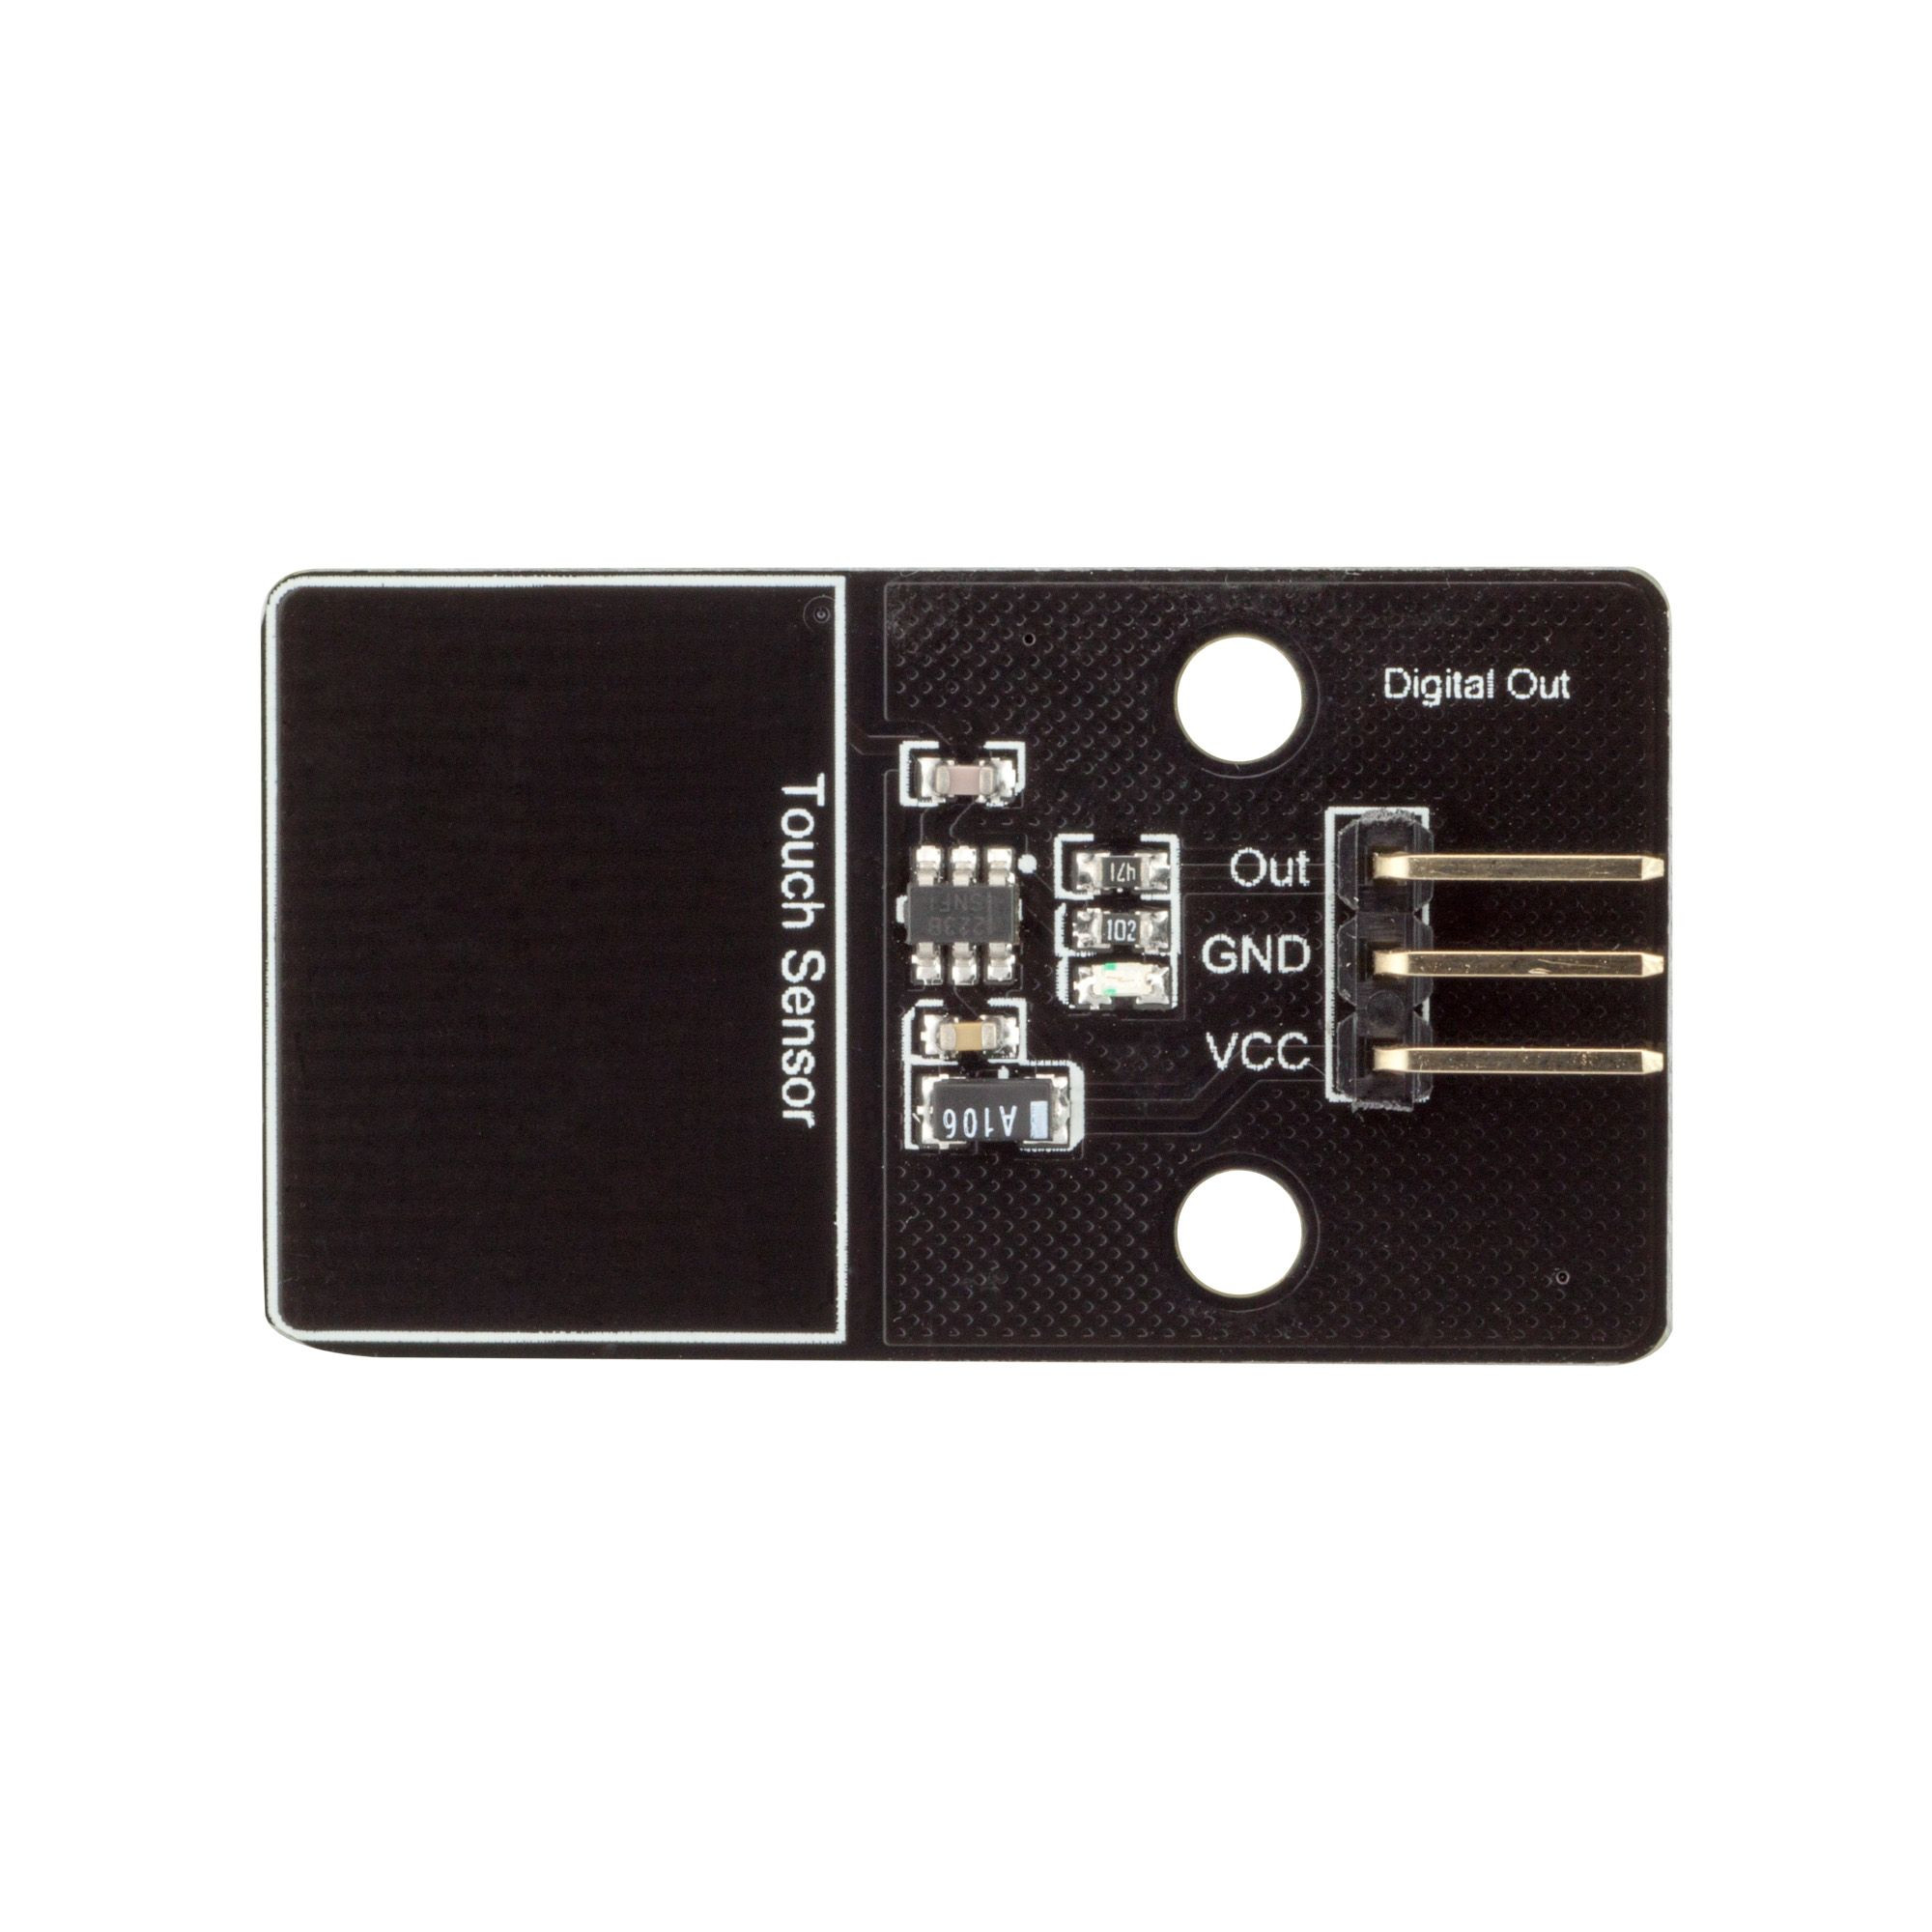 Digital-Capacitive-Touch-Sensor-Module-RobotDyn-for-Arduino---products-that-work-with-official-Ardui-1264023